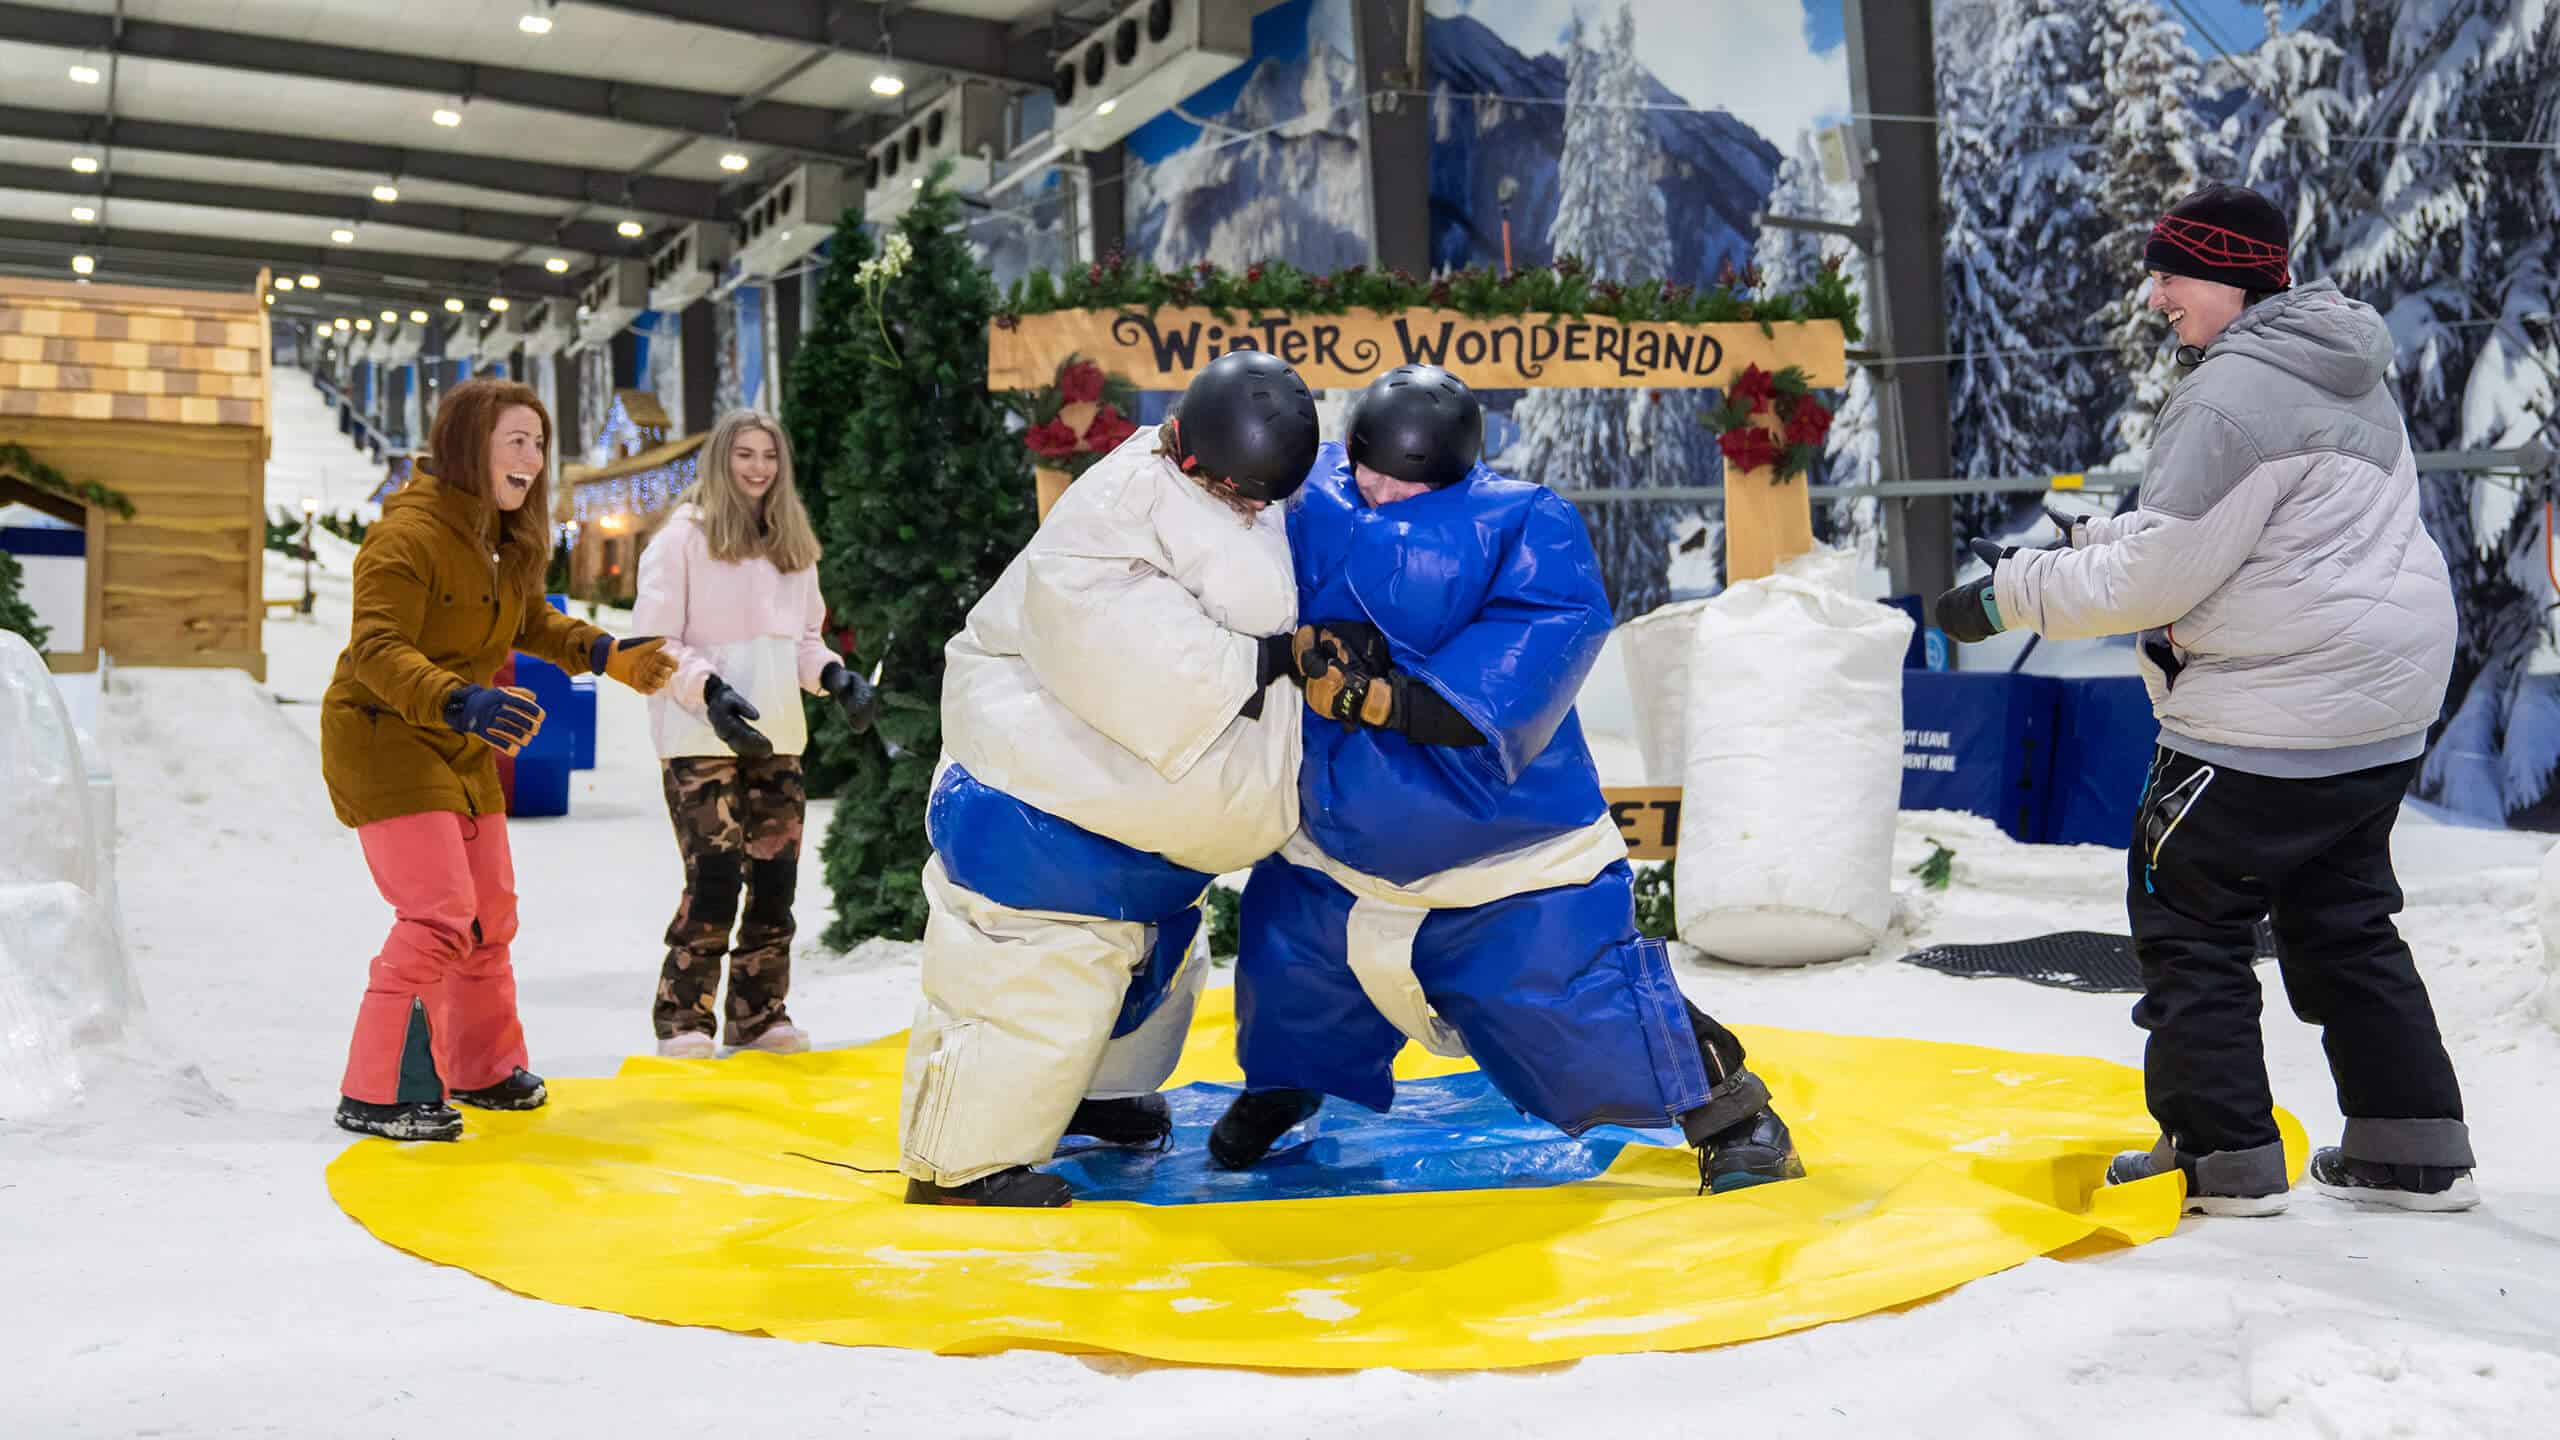 Company having a fun team building event at Snowplanet doing inflatable sumo wrestling in the snow.